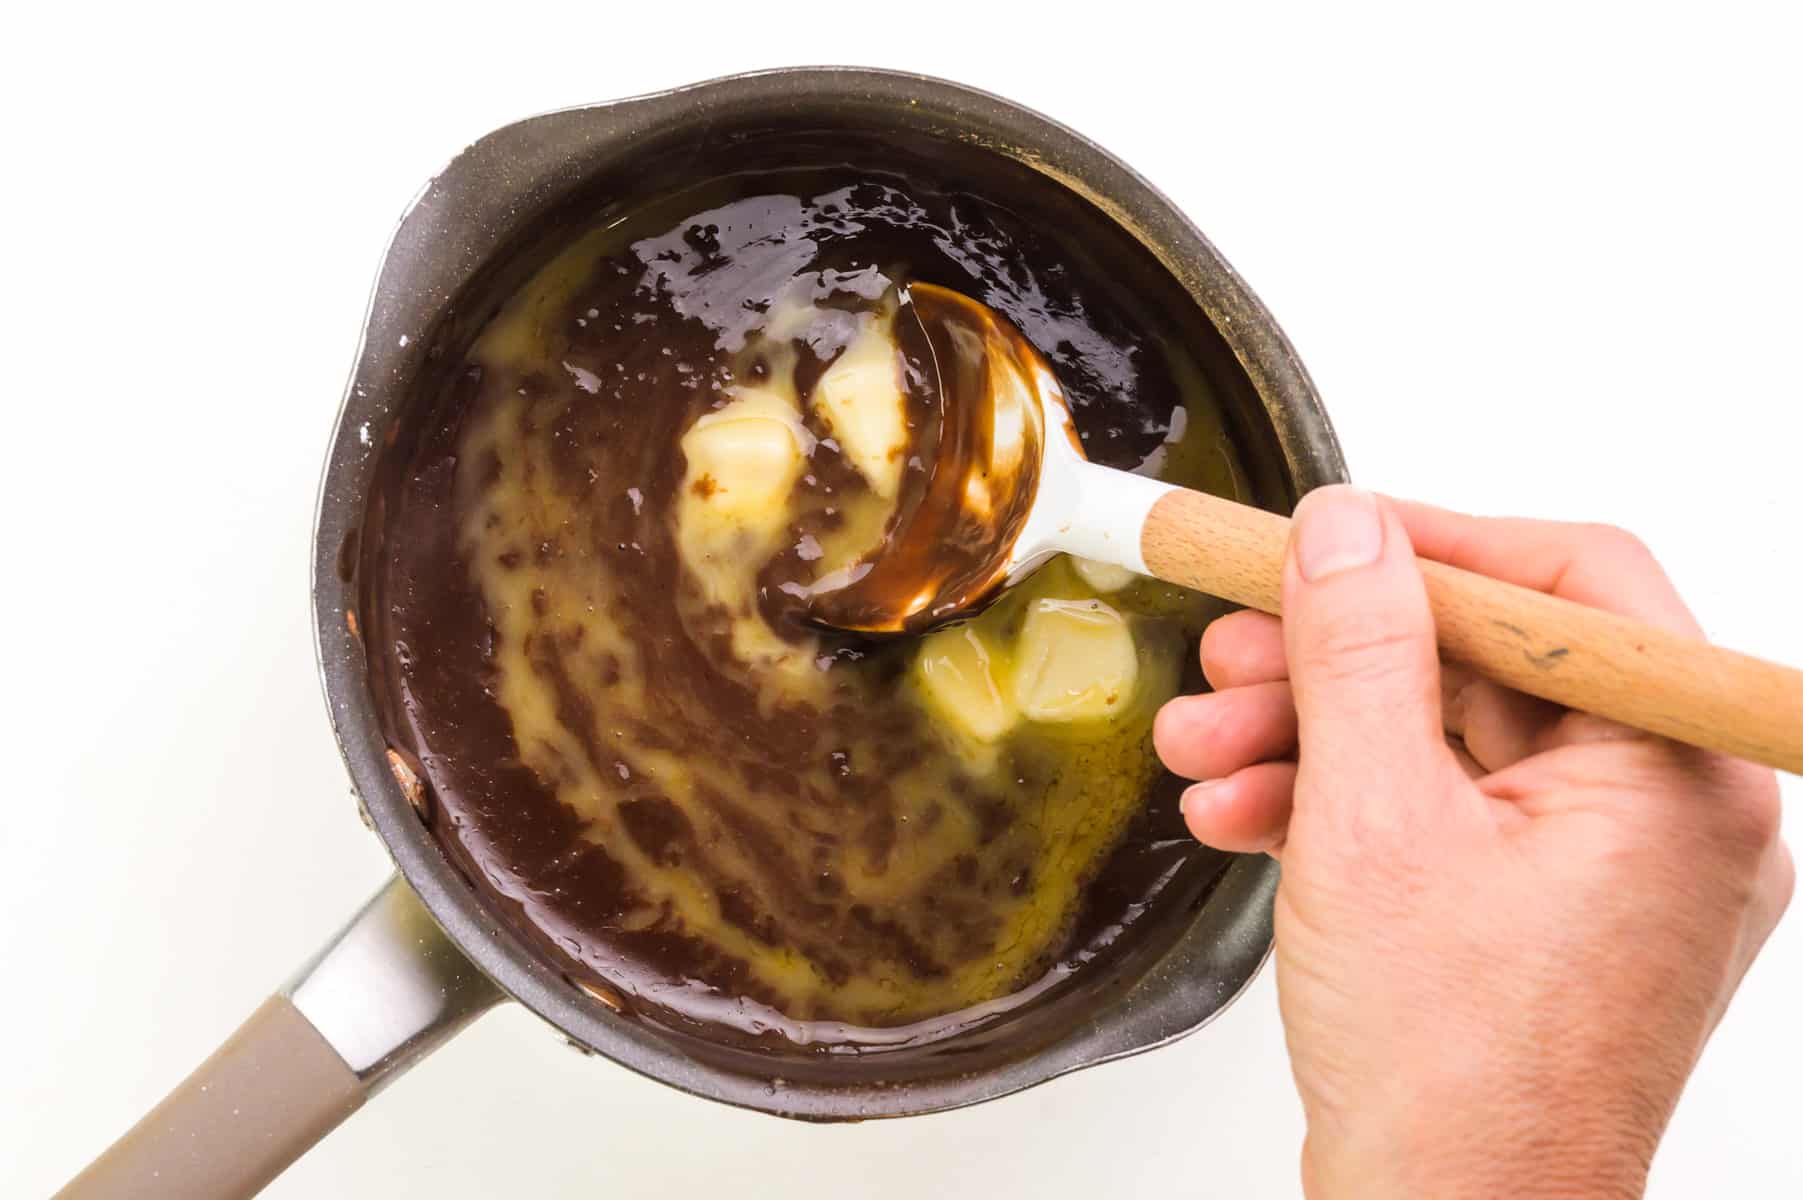 Vegan butter is being stirred into a saucepan with other pudding ingredients.